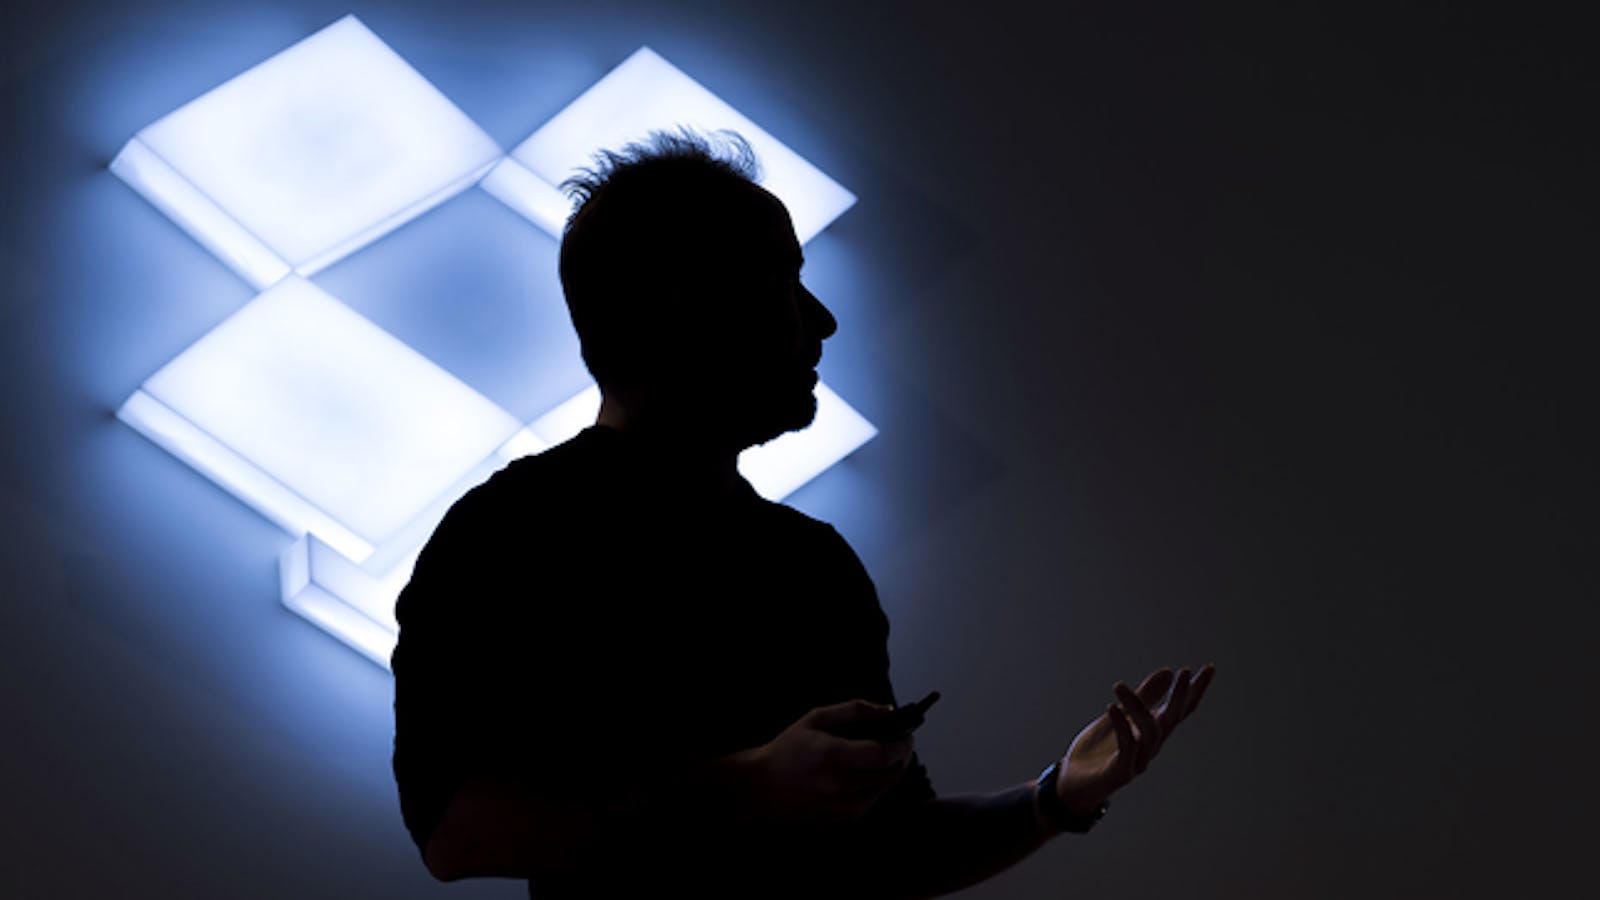 Dropbox CEO Drew Houston during an event in San Francisco. Photo by Bloomberg